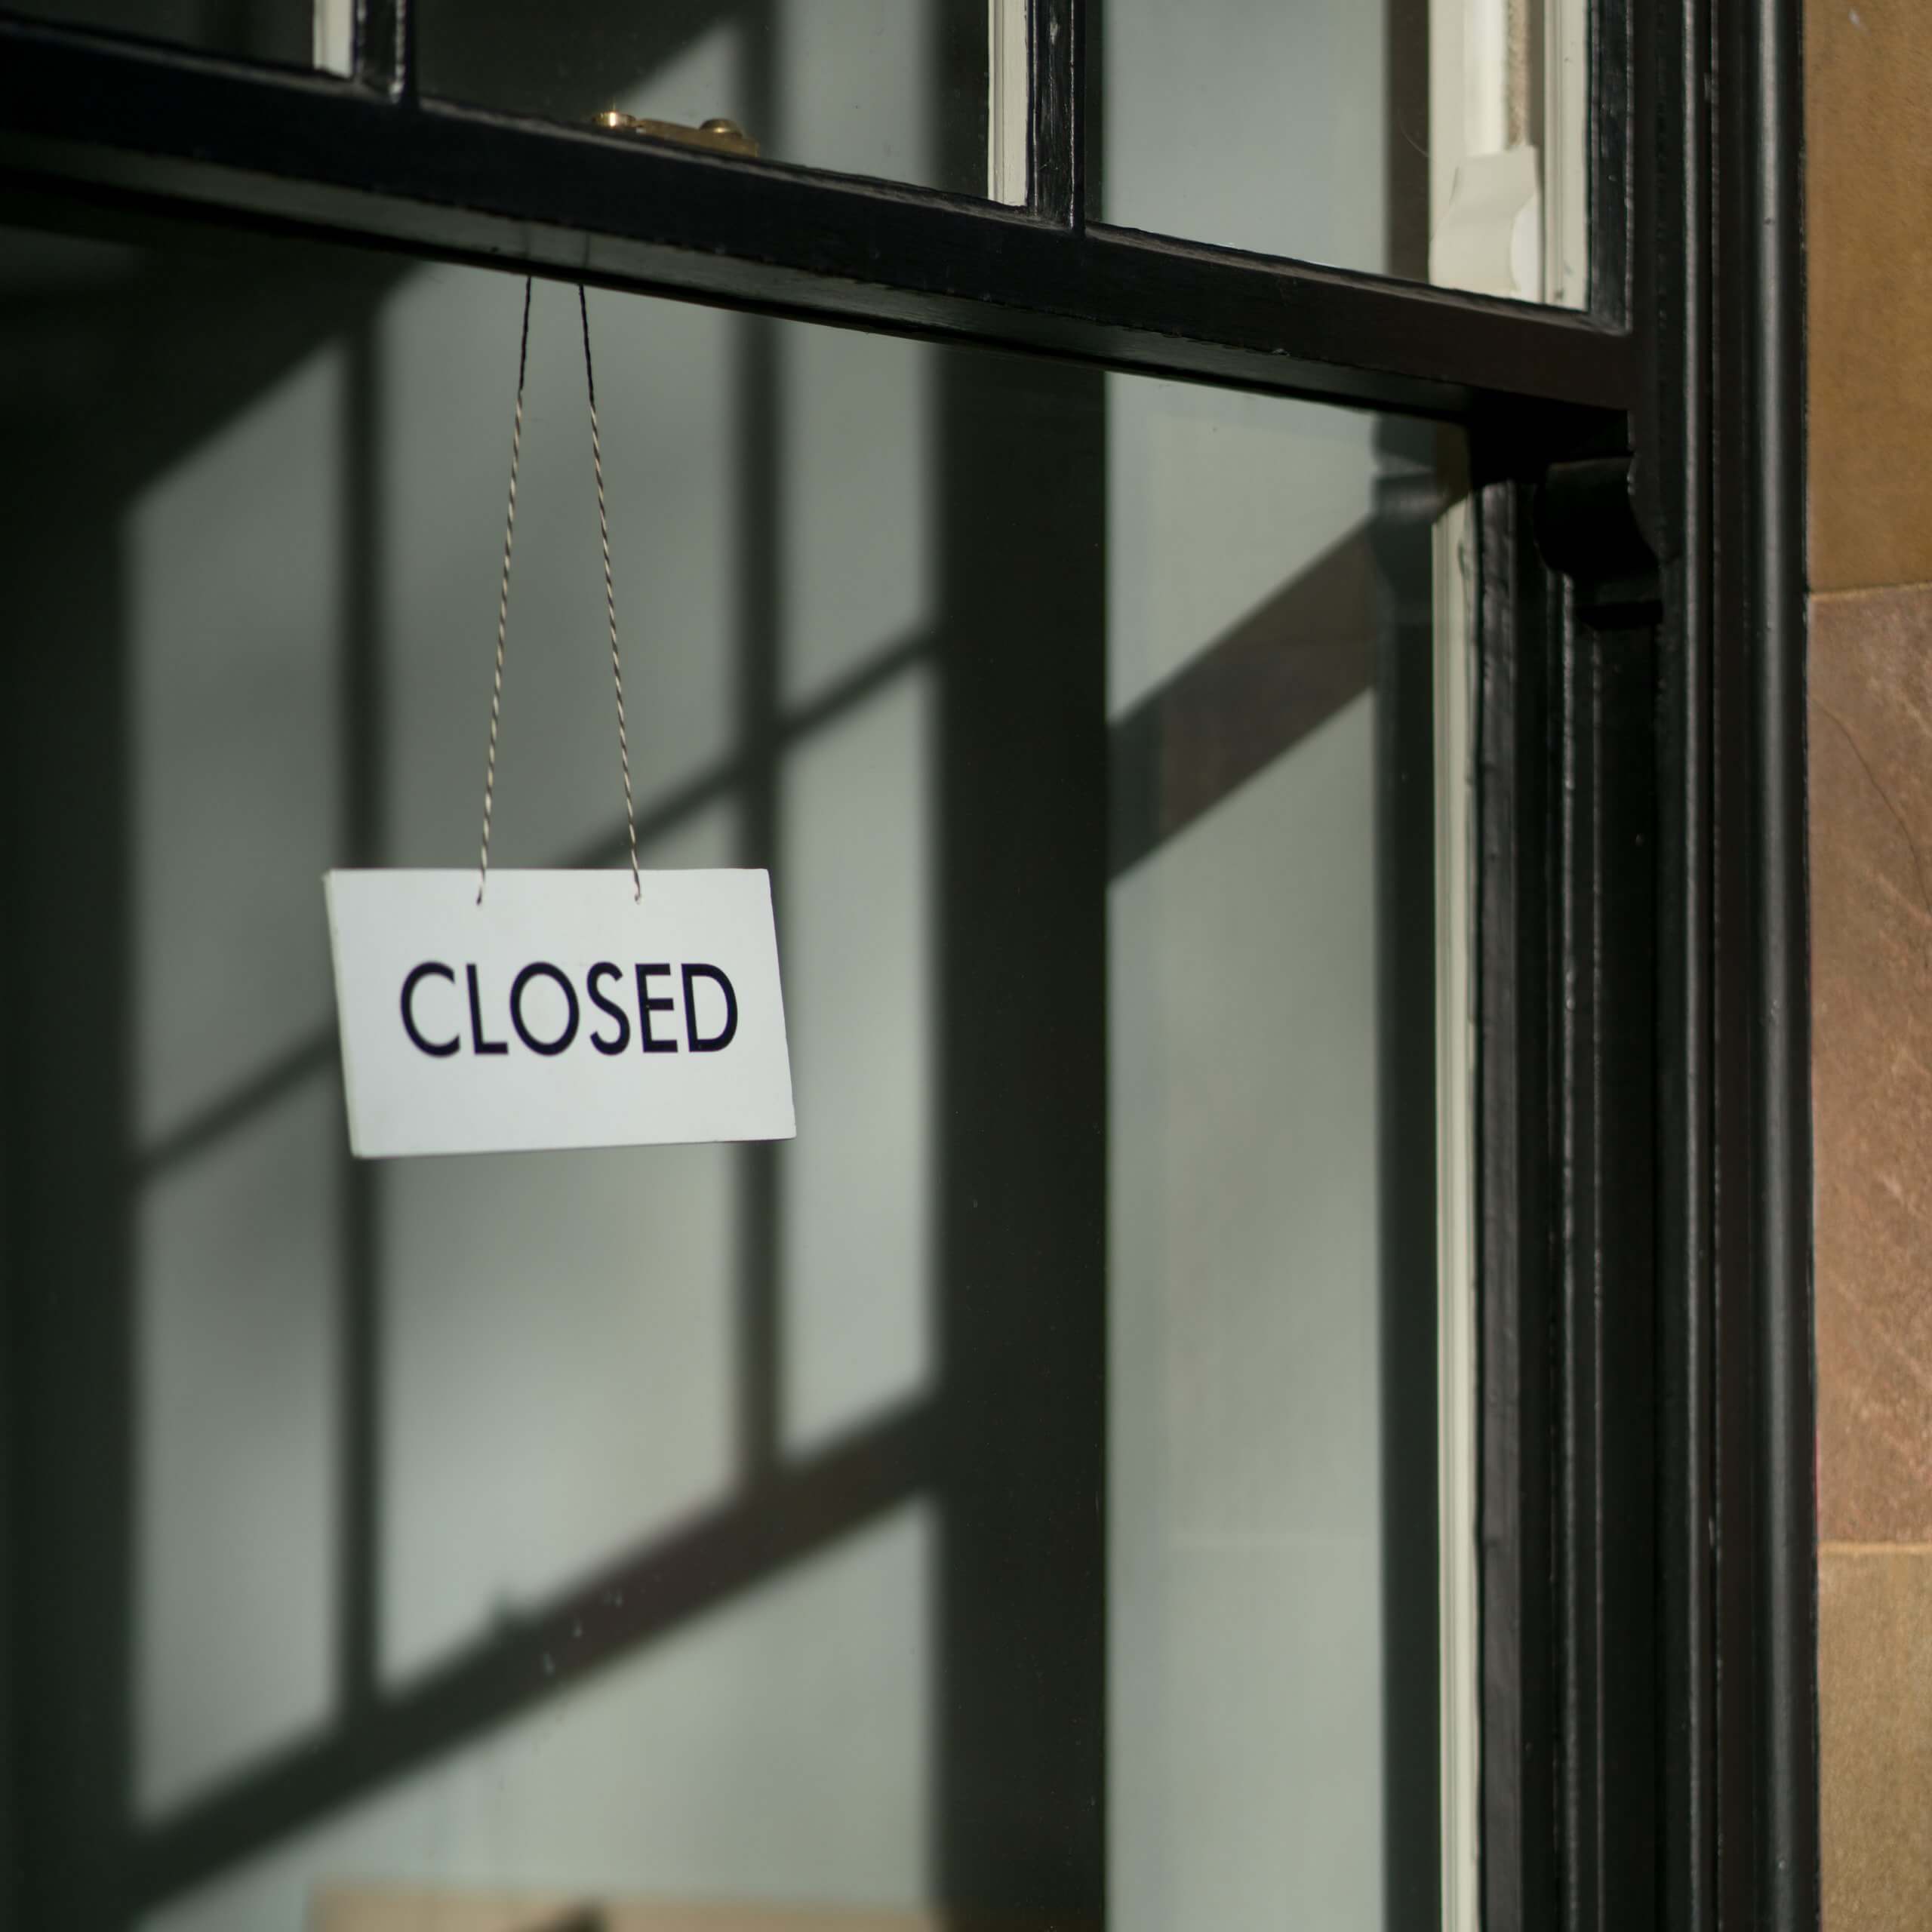 Closed sign on shop window - a visual metaphor for the topic of this article, business interruption insurance